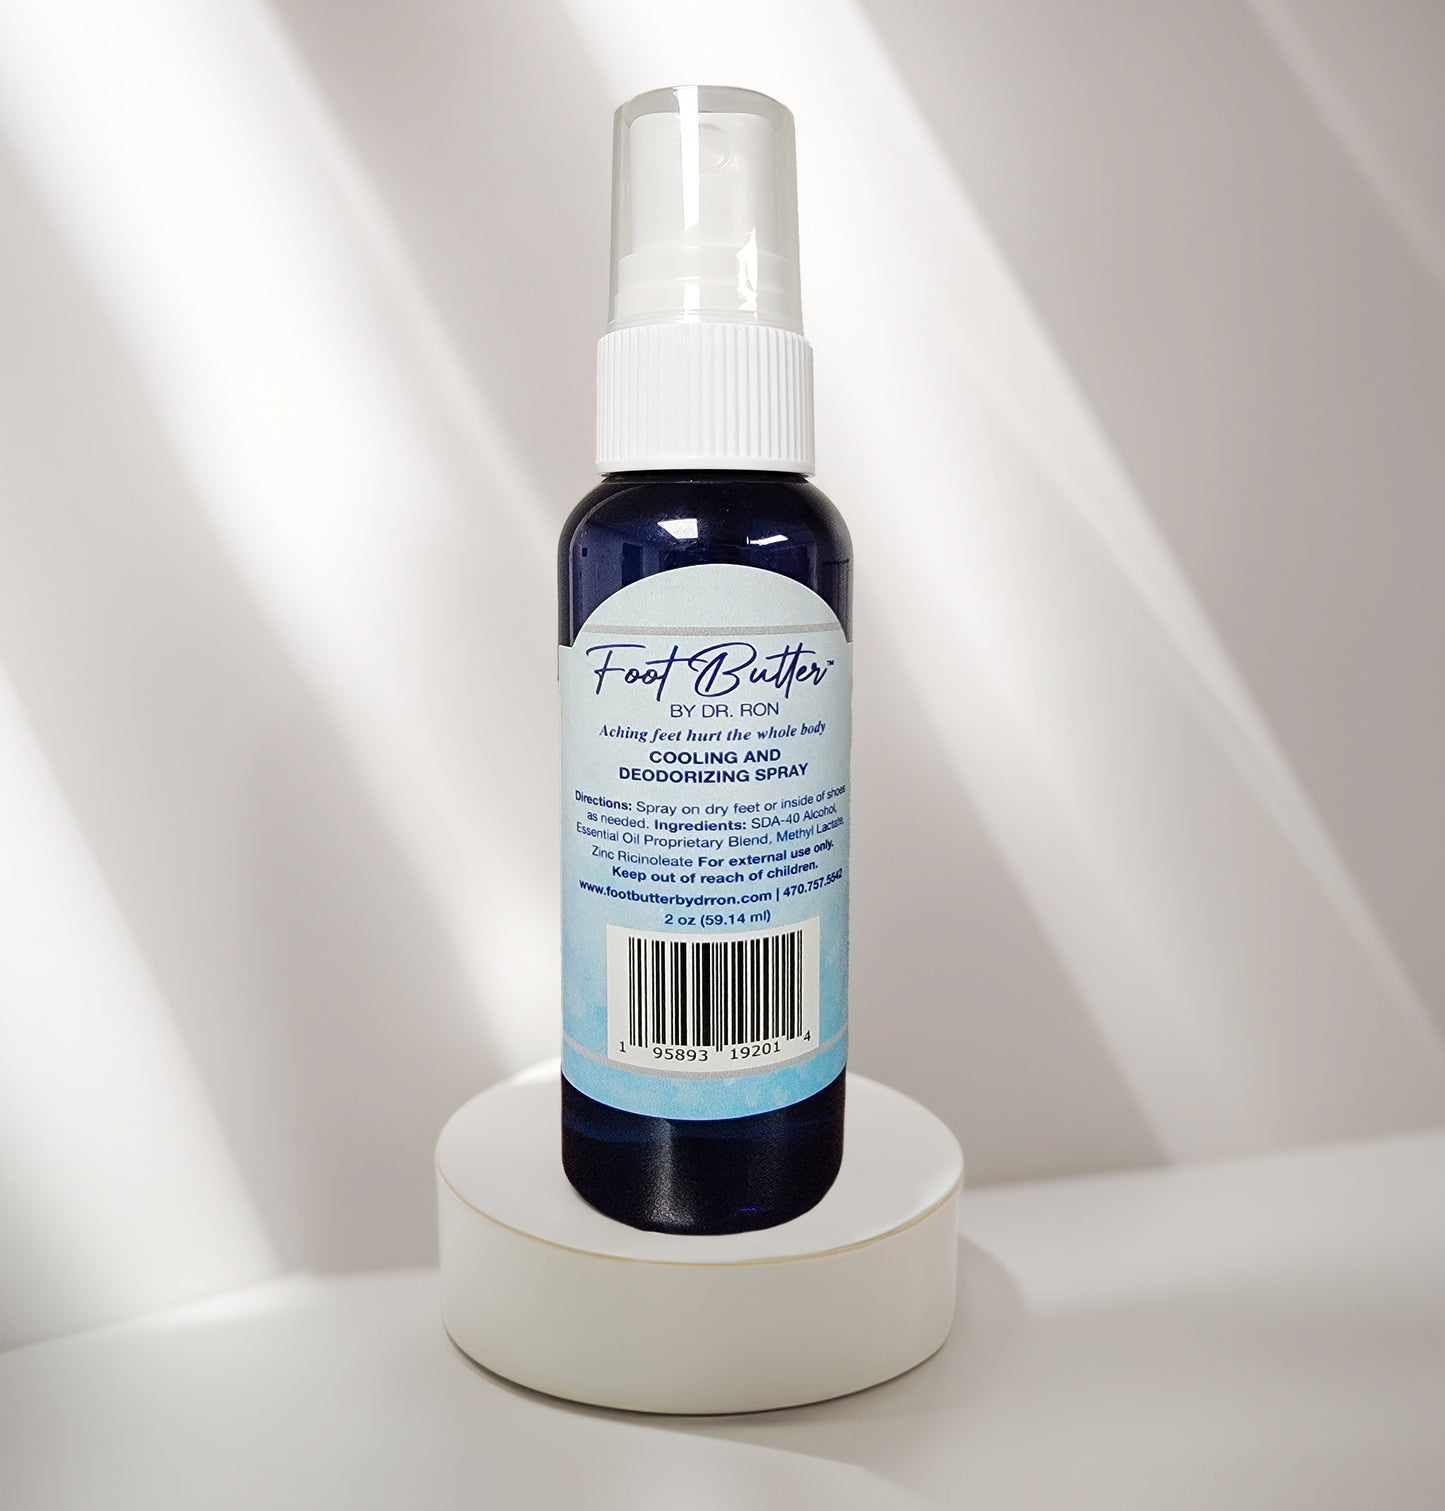 COOLING SPRAY Foot Butter by Dr Ron Cooling & Deodorizing Spray - Lavender and Citrus